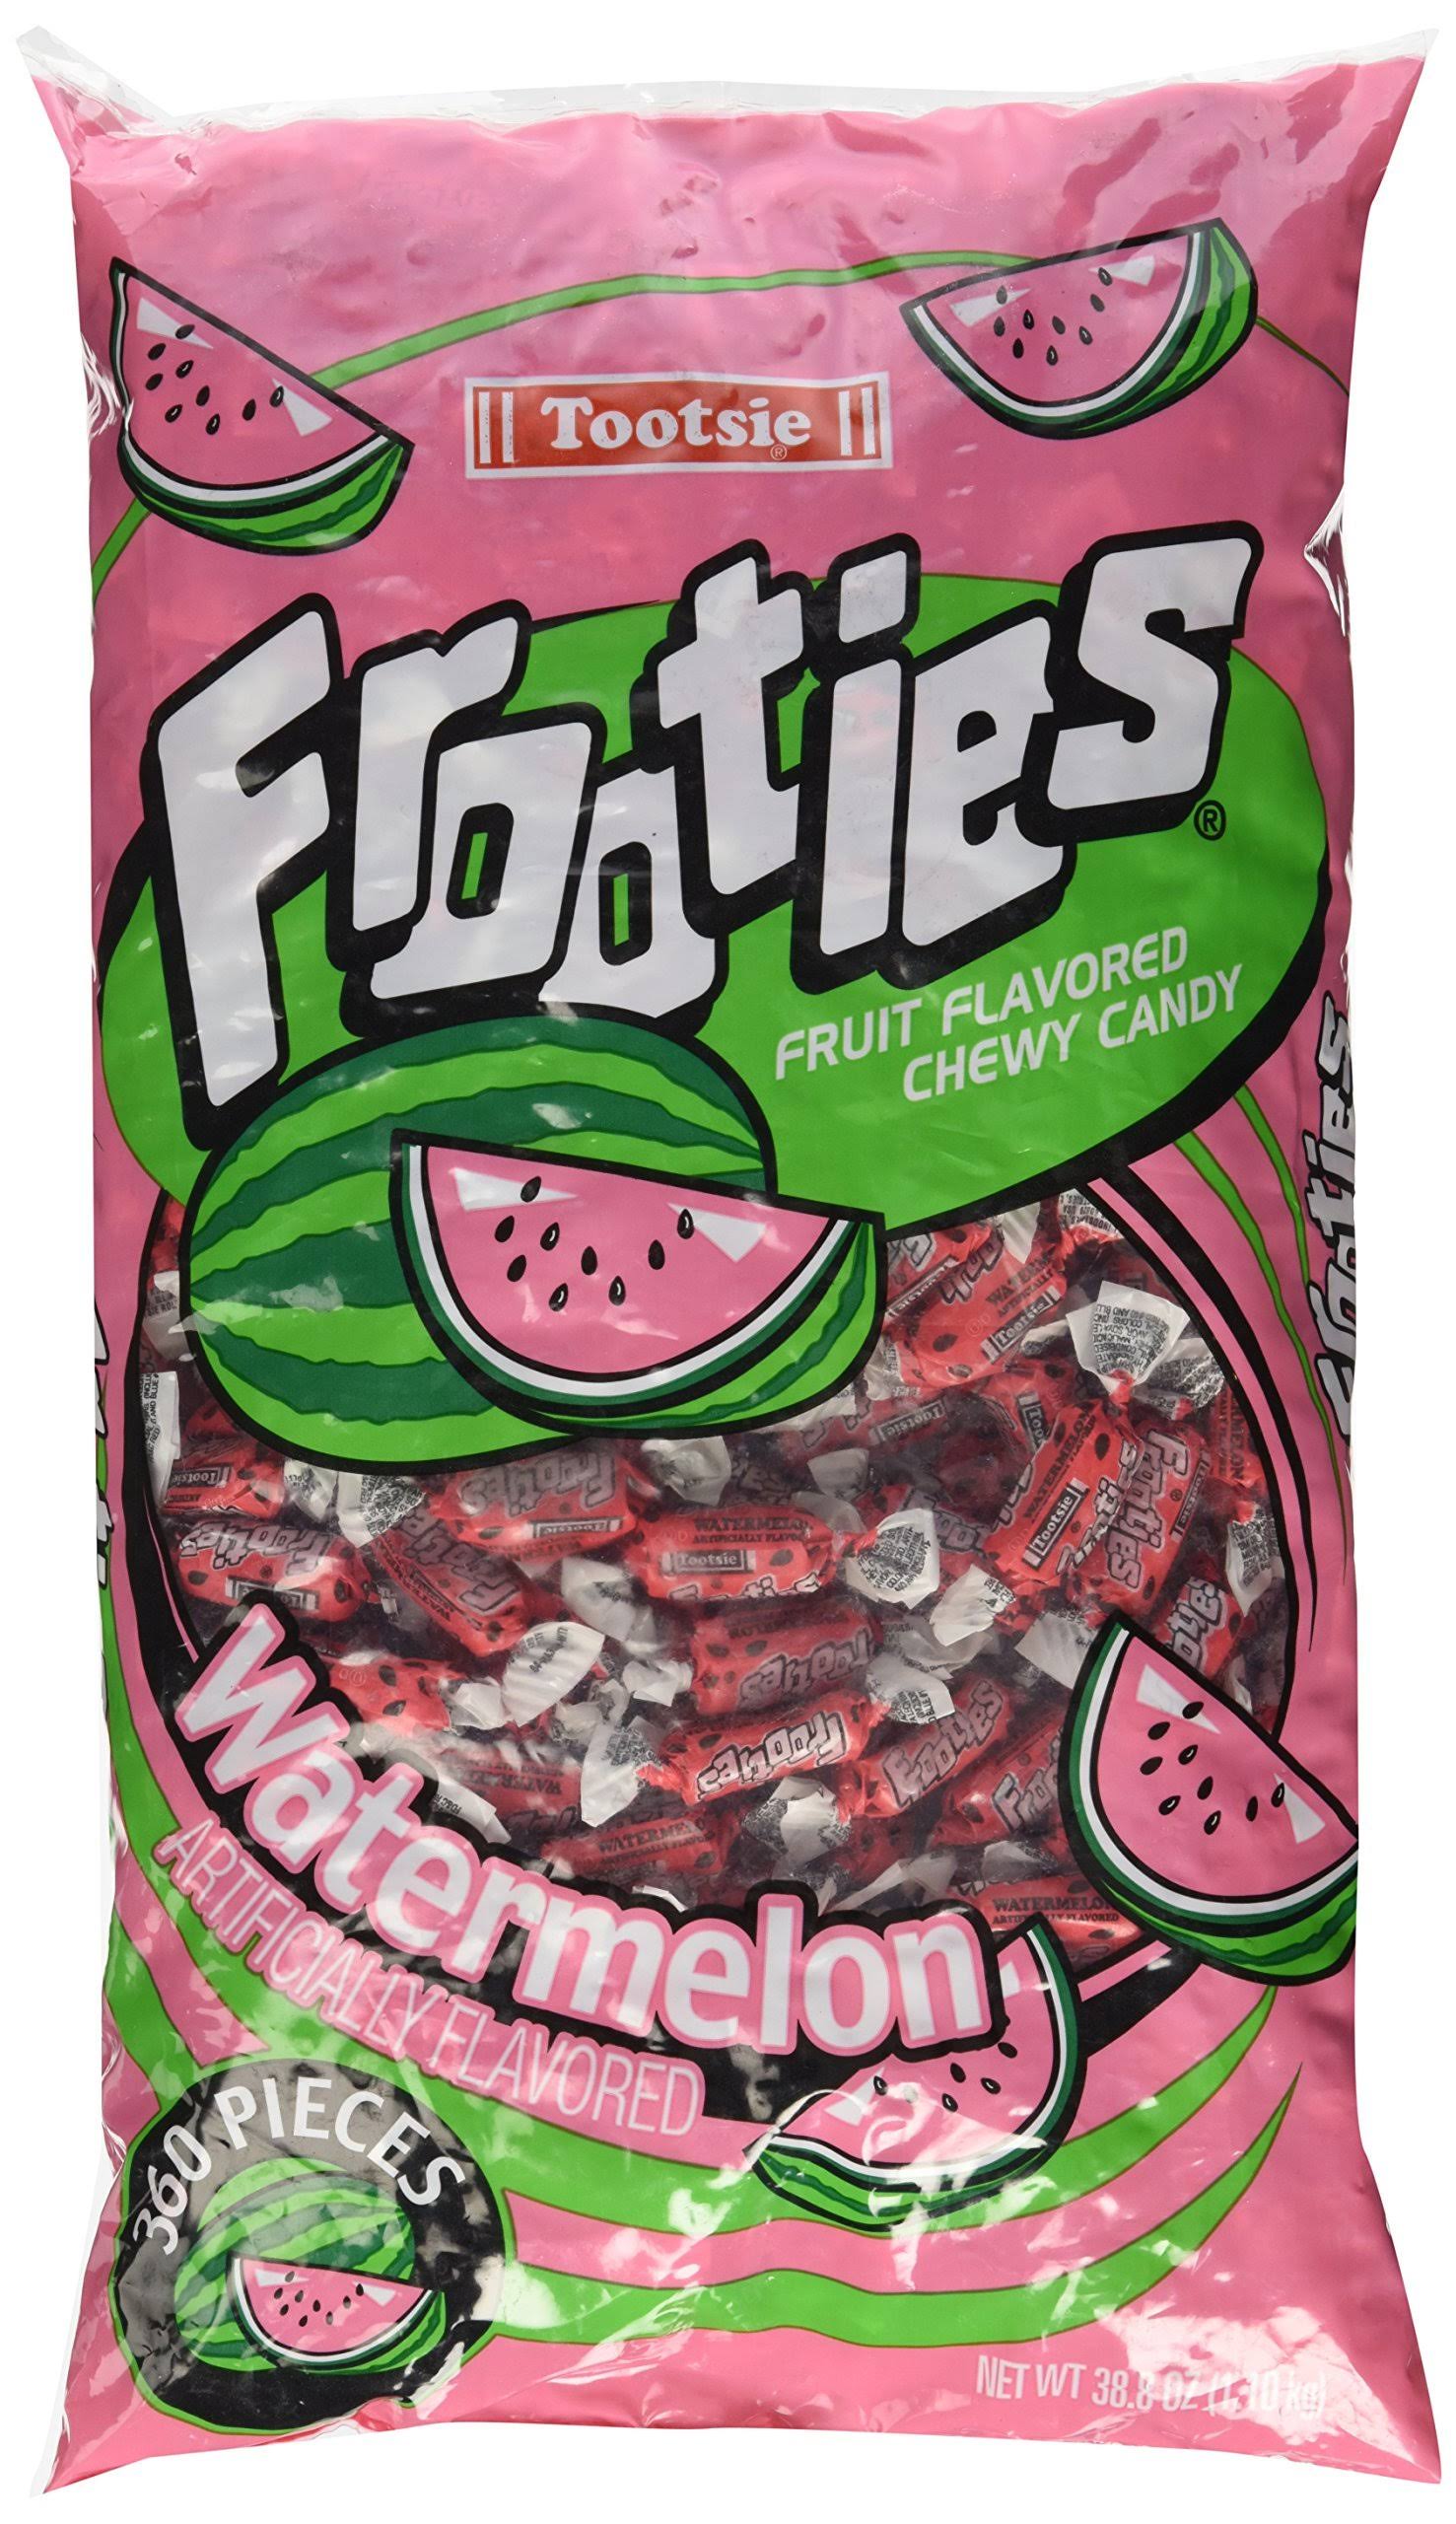 Tootsie Roll Frooties Chewy Candy - Watermelon, 360pcs